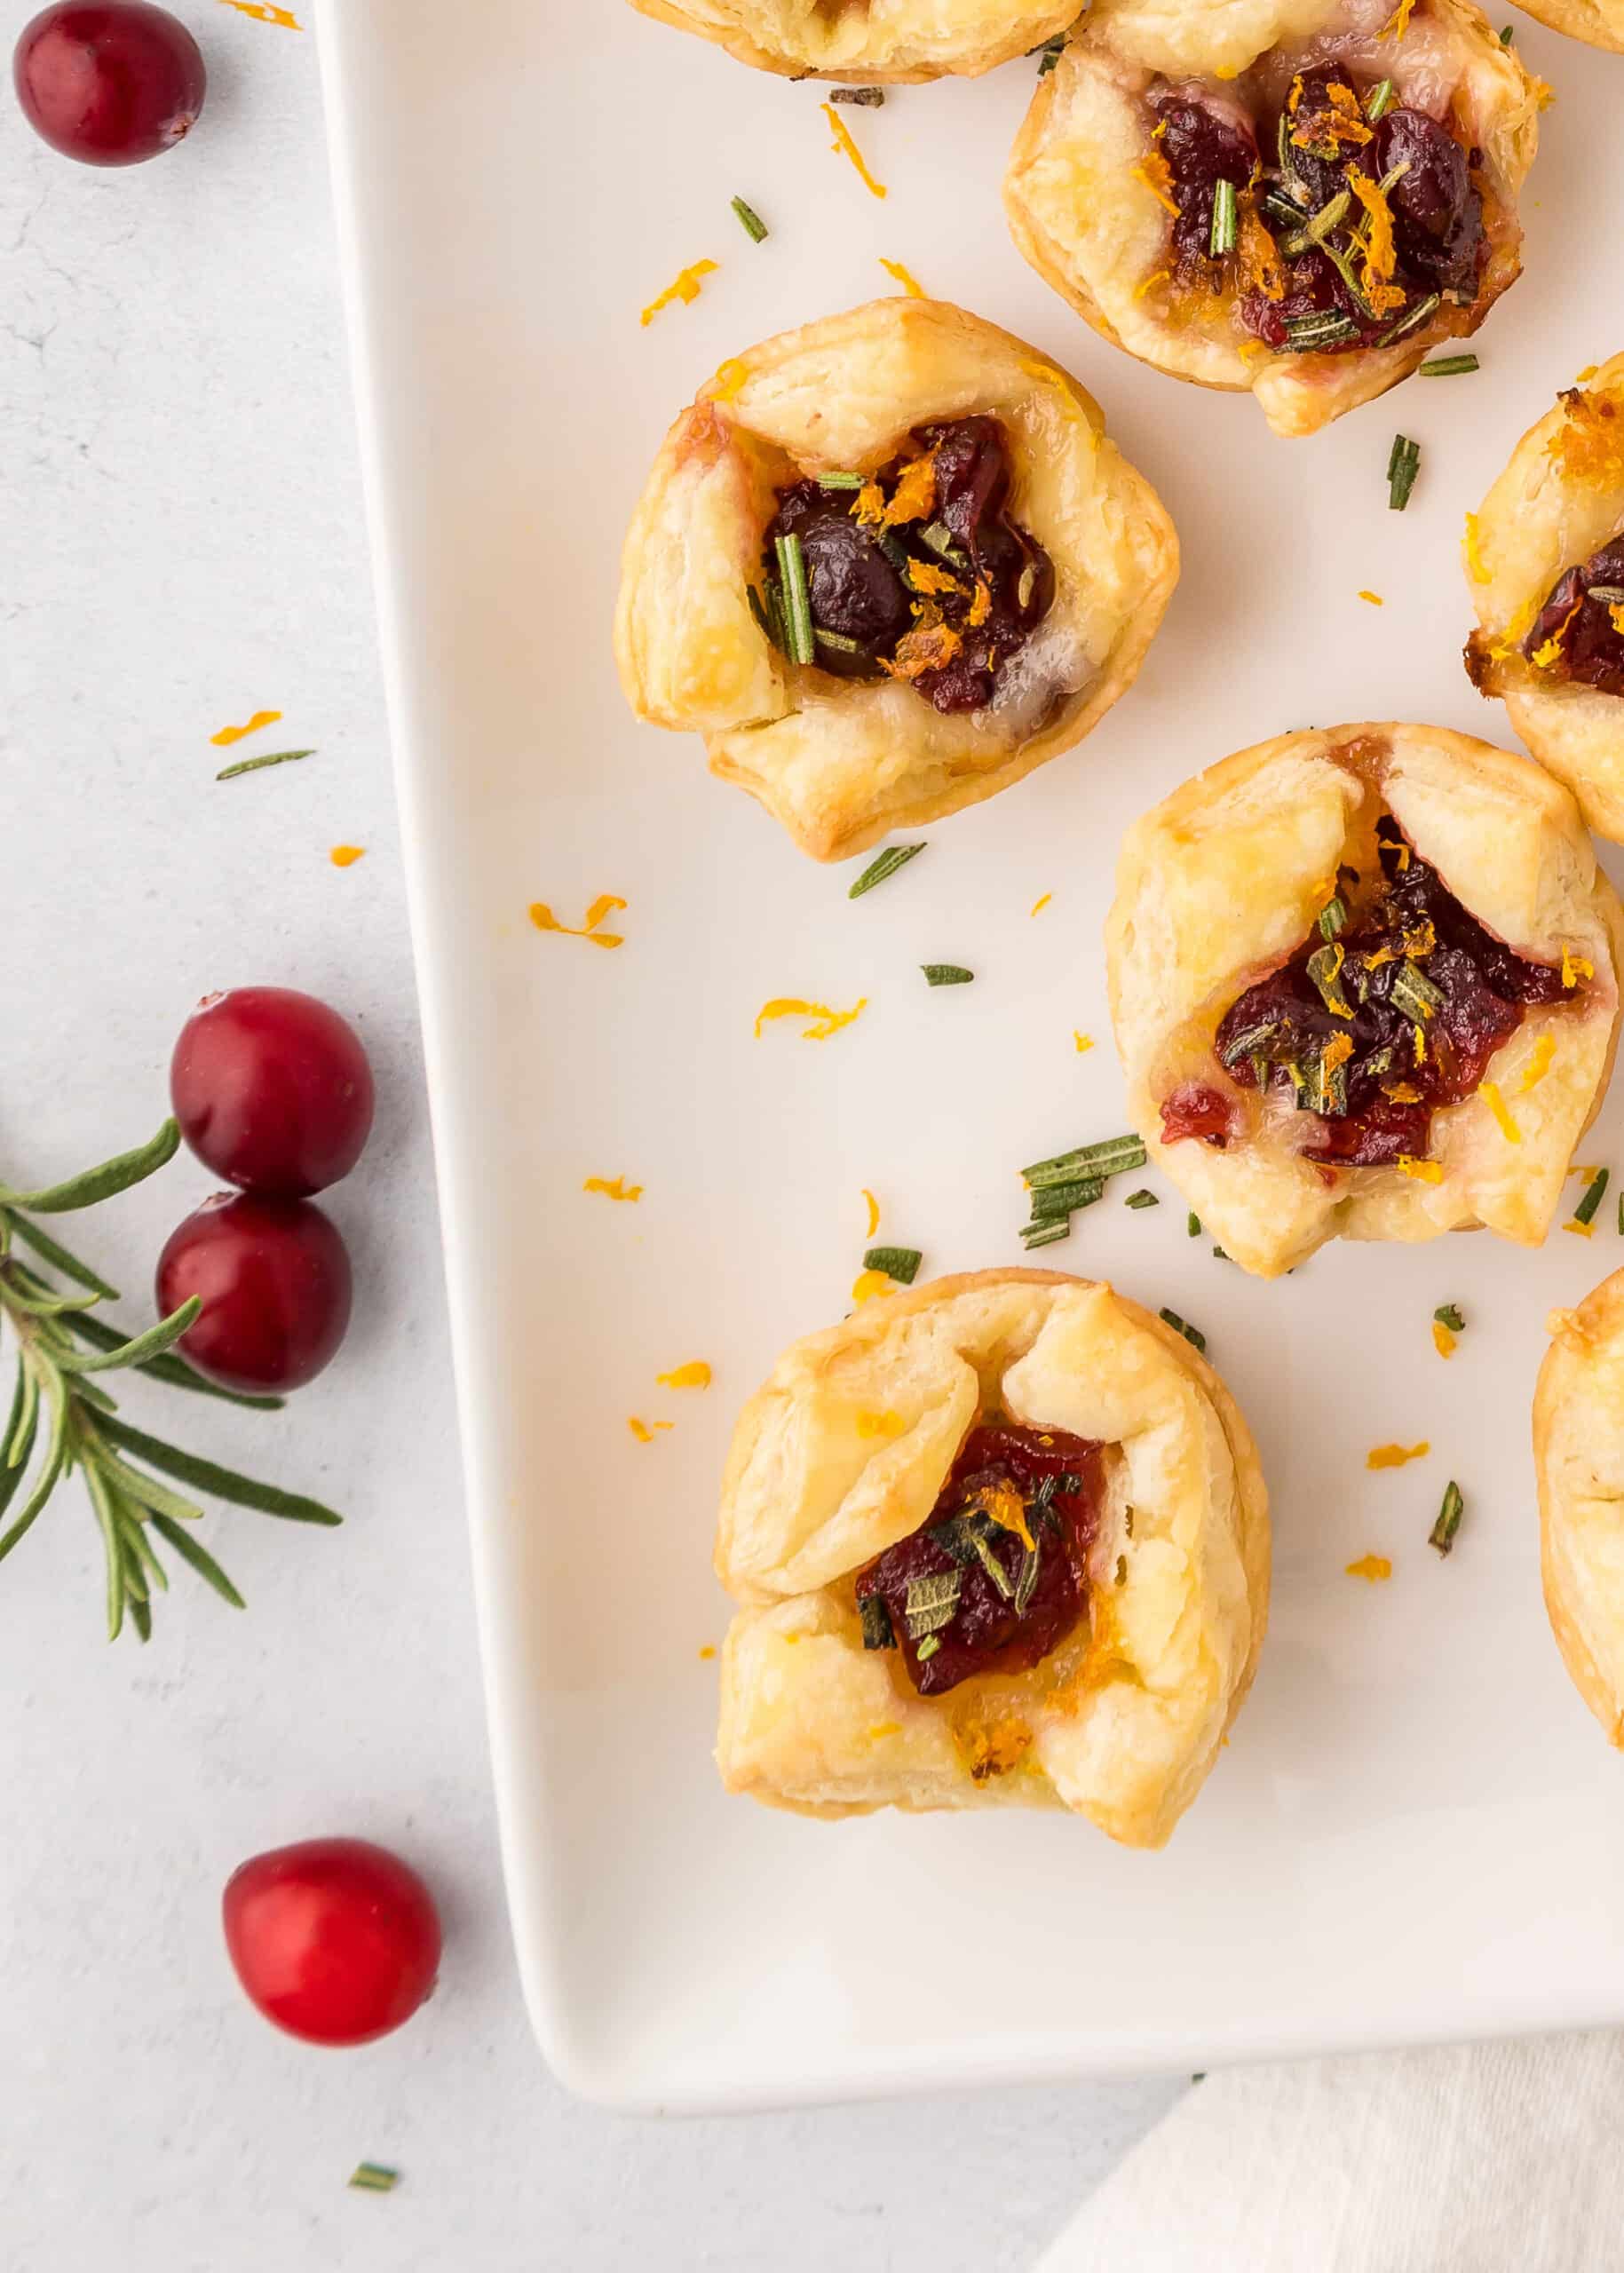 Cranberry and Camembert Bites with Rosemary (baked Camembert with cranberries appetizers)